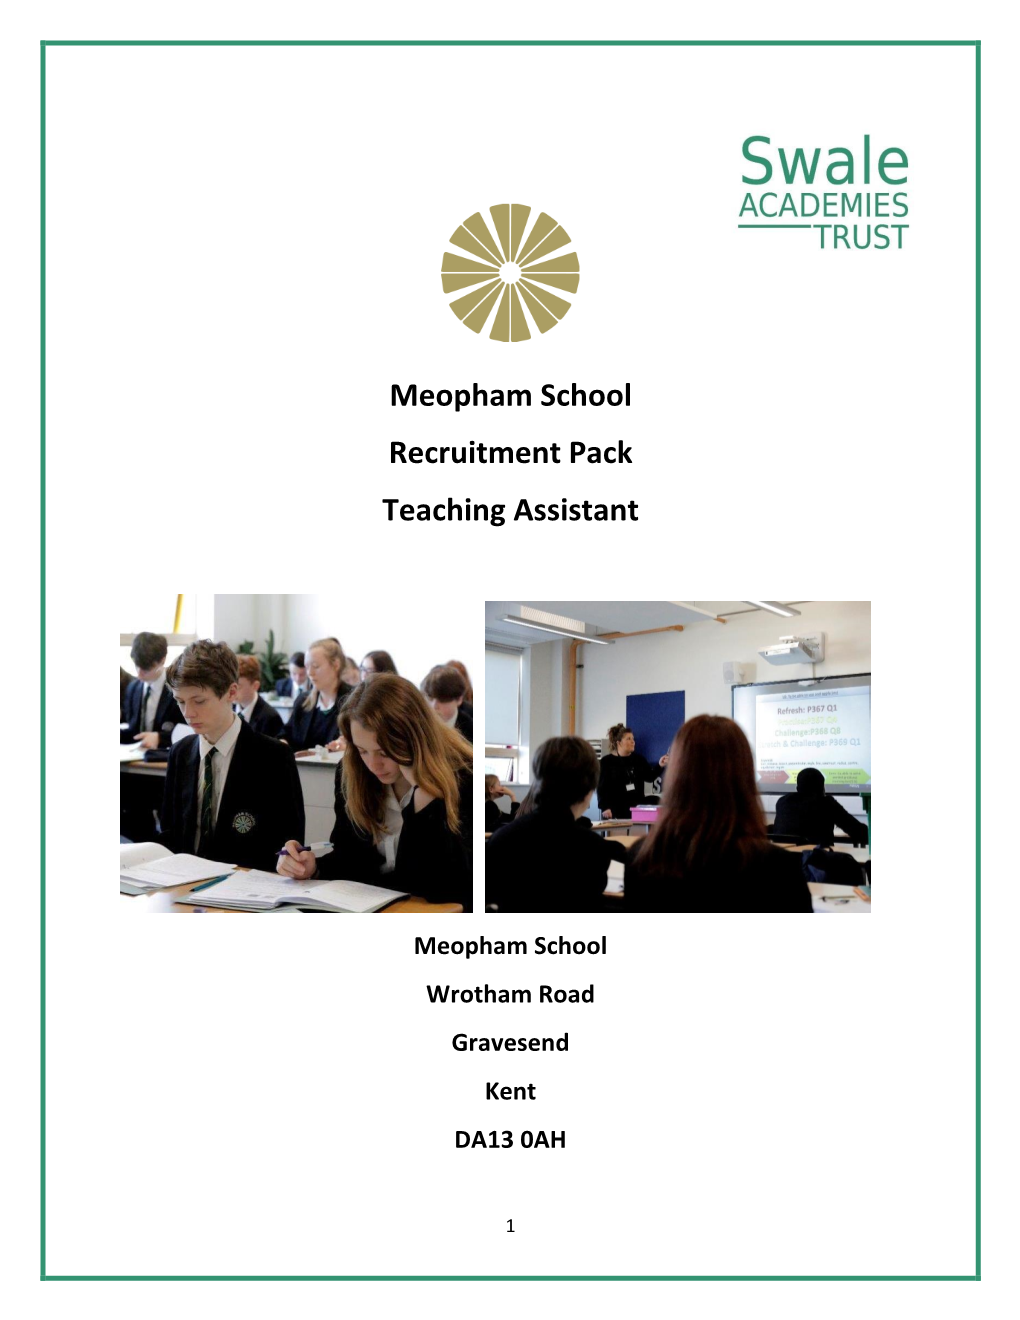 Meopham School Recruitment Pack Teaching Assistant